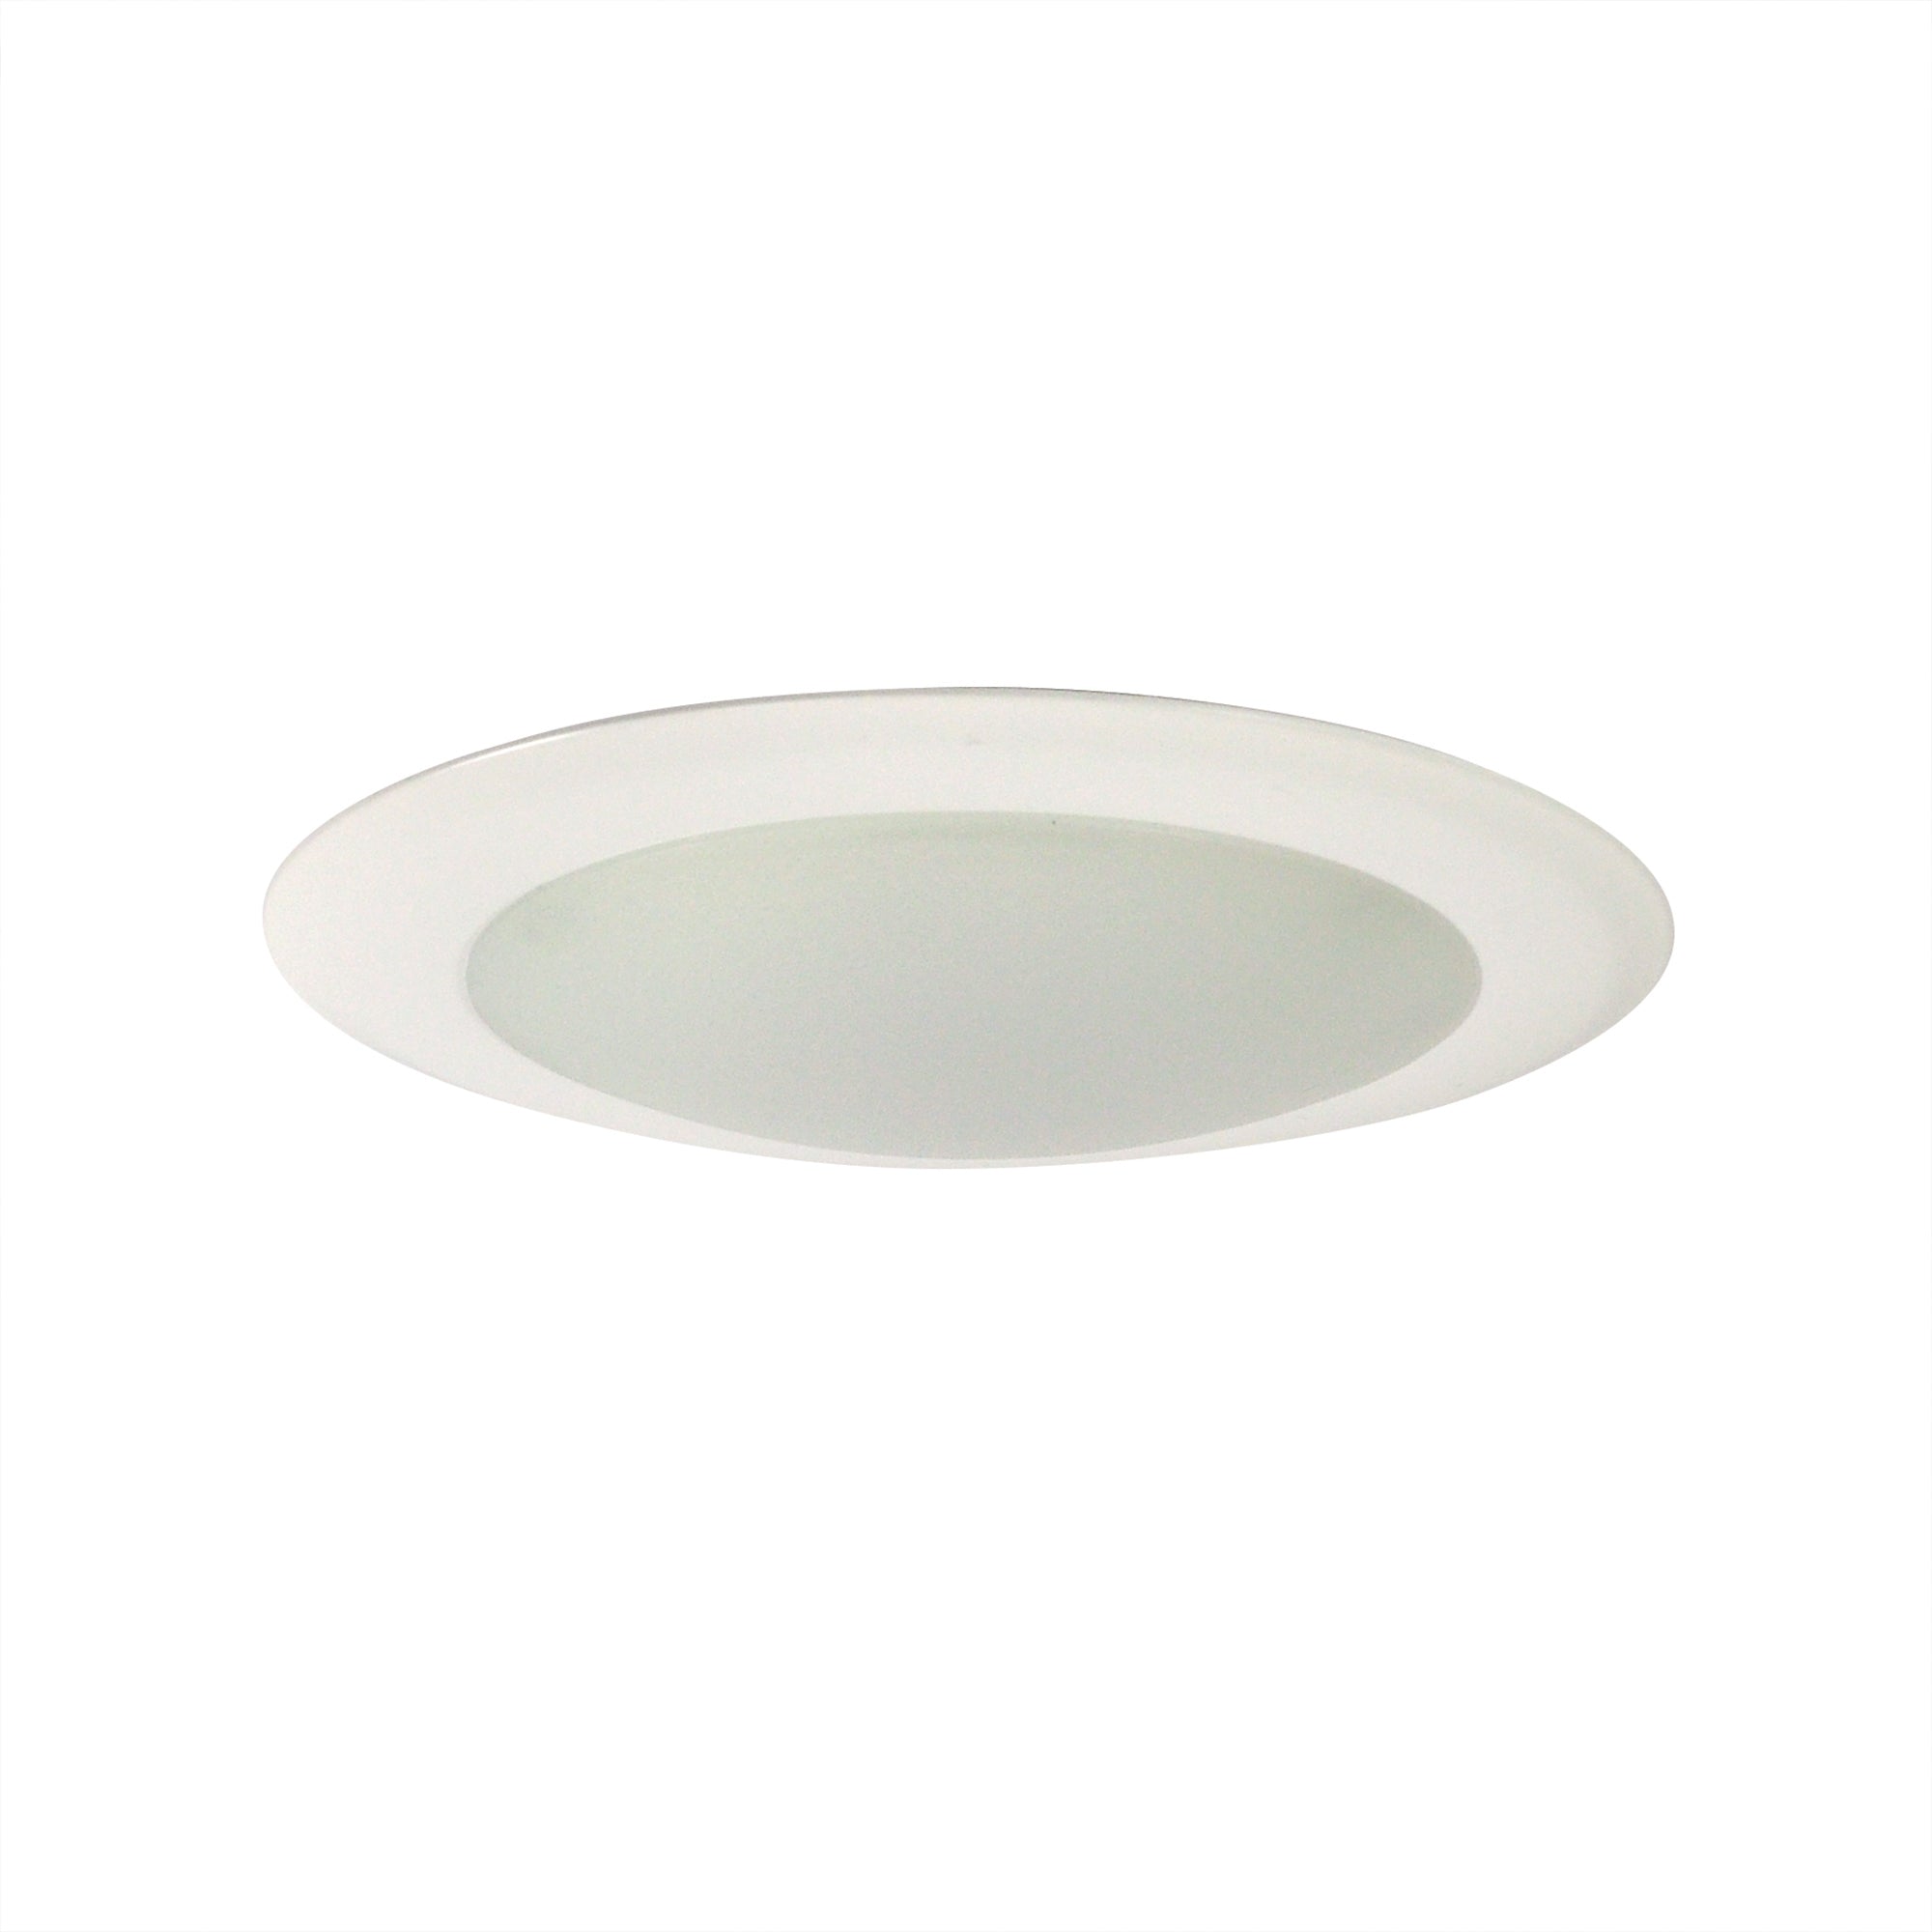 Nora Lighting NLOPAC-R6509T2440W - Surface - 6 Inch AC Opal LED Surface Mount, 1150lm / 16.5W, 4000K, White finish